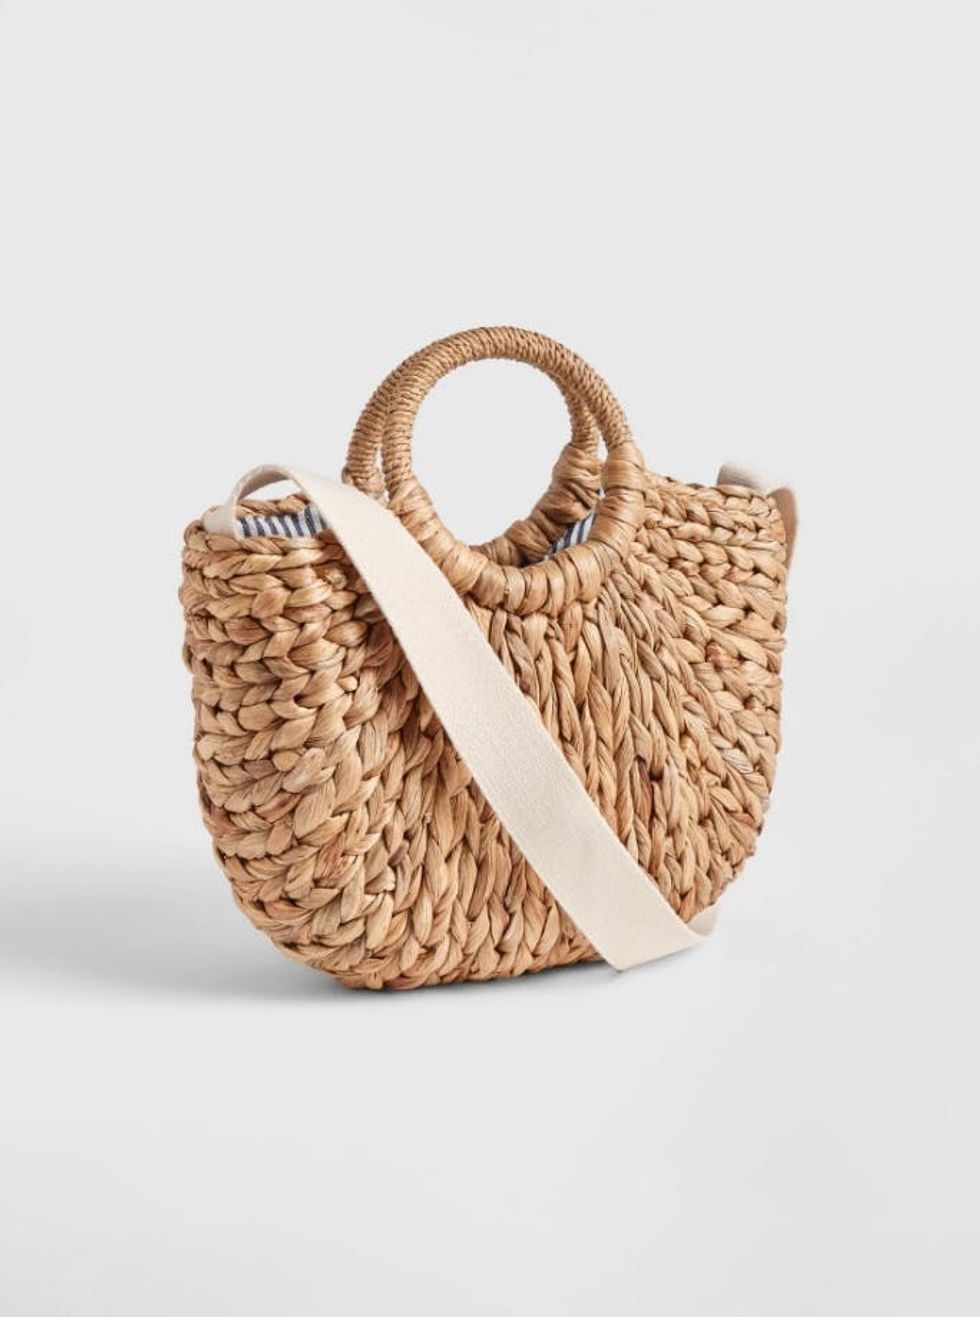 19 Straw Bags You Can Take to Work *and* to the Beach - Brit + Co